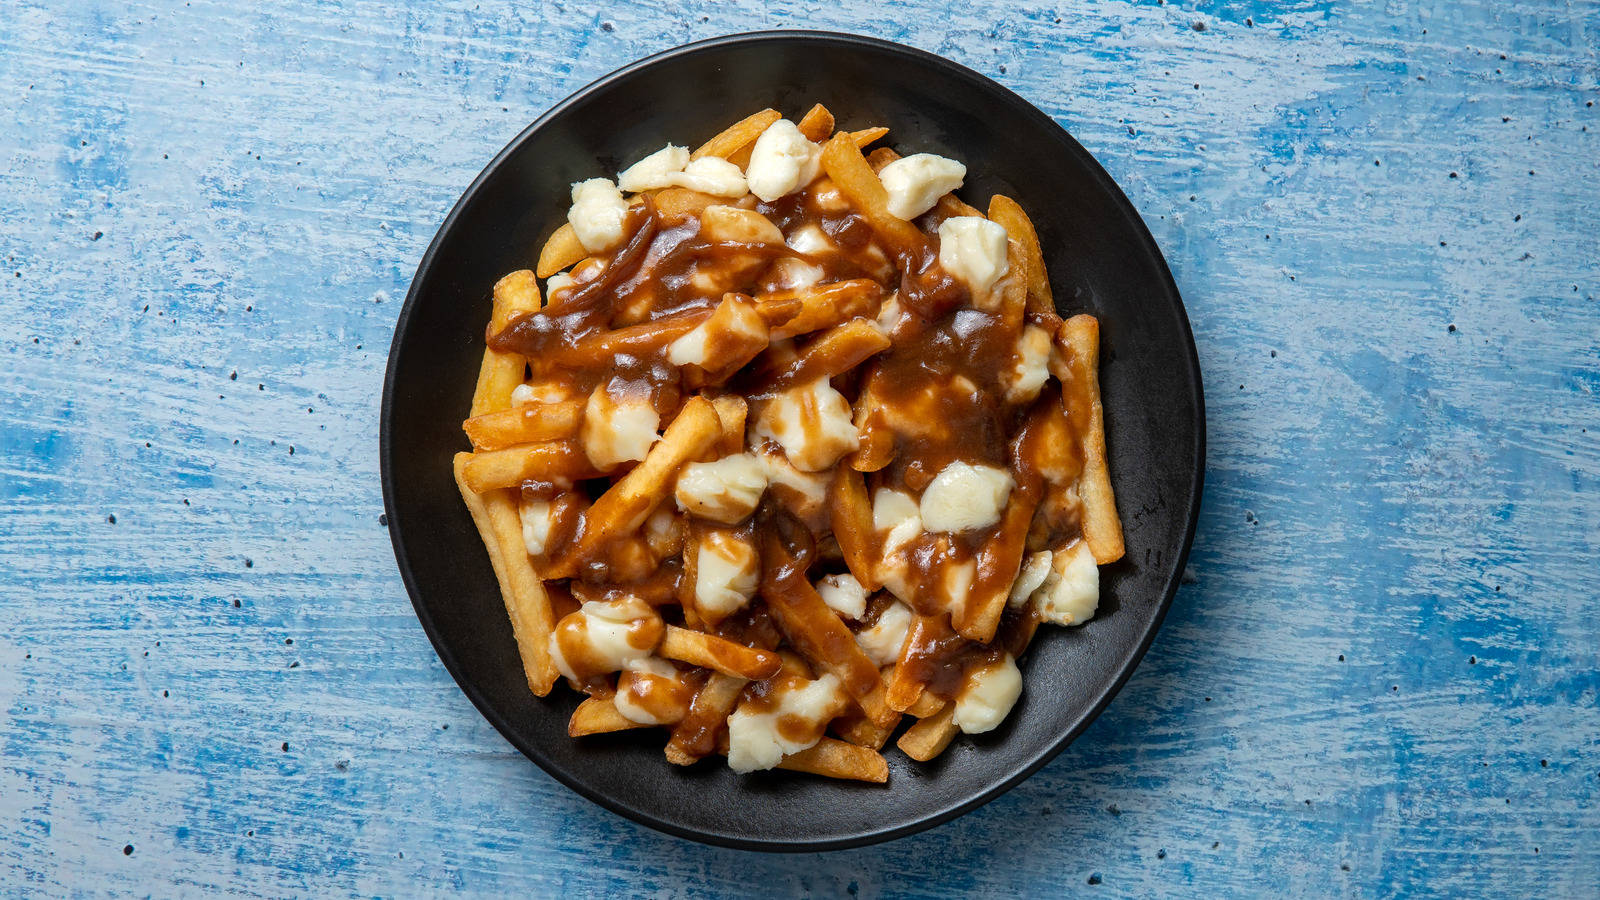 "A Delicious Plate of Canadian Poutine" Wallpaper